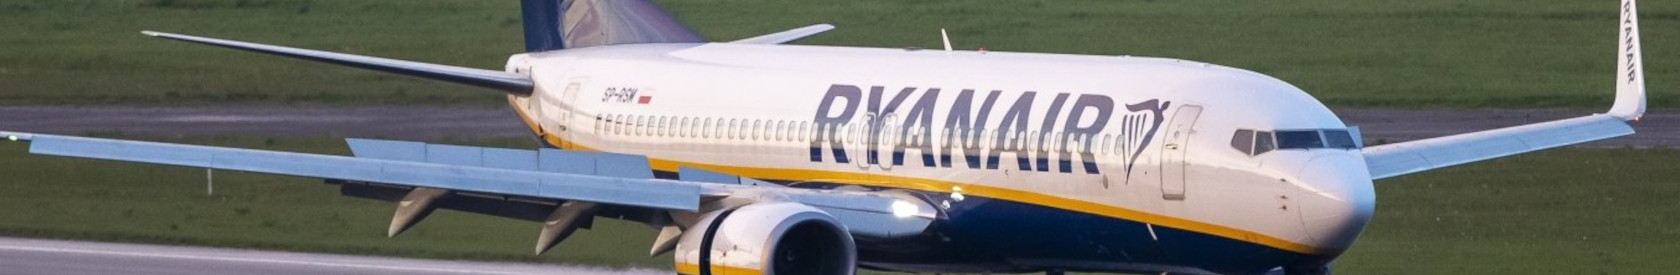 ICAO recognizes forced unscheduled landing for a RYANAIR flight as an act of illegal interference by the Belarussian government in the activities of civil aviation